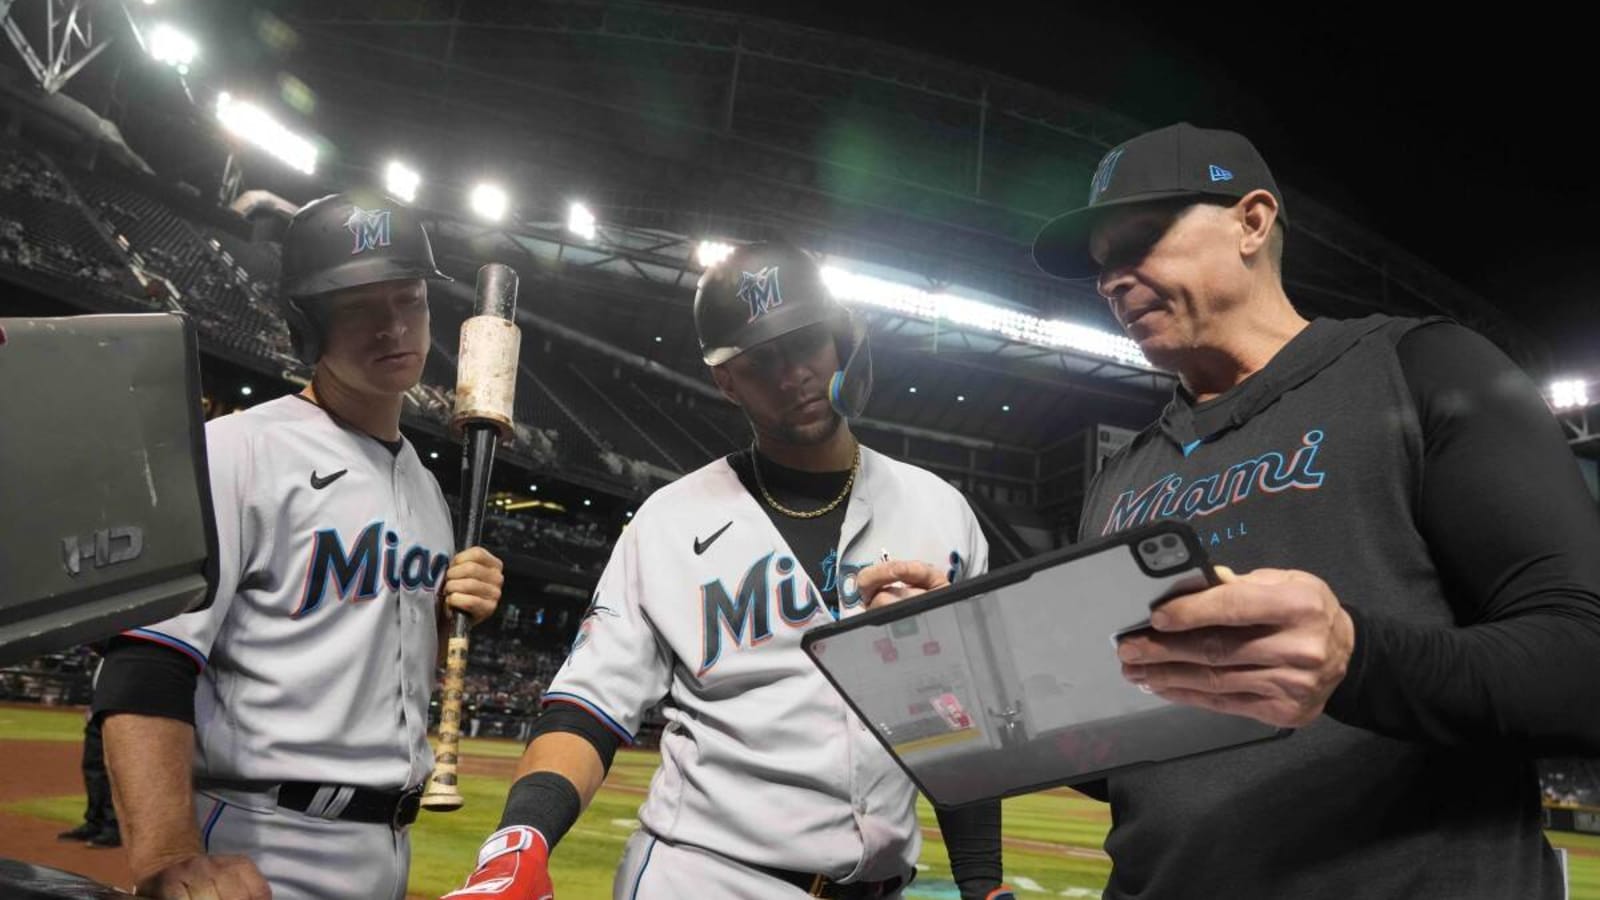 Seattle Mariners Interviewing Miami Marlins Hitting Coach For Potentially More Prominent Role on Coaching Staff